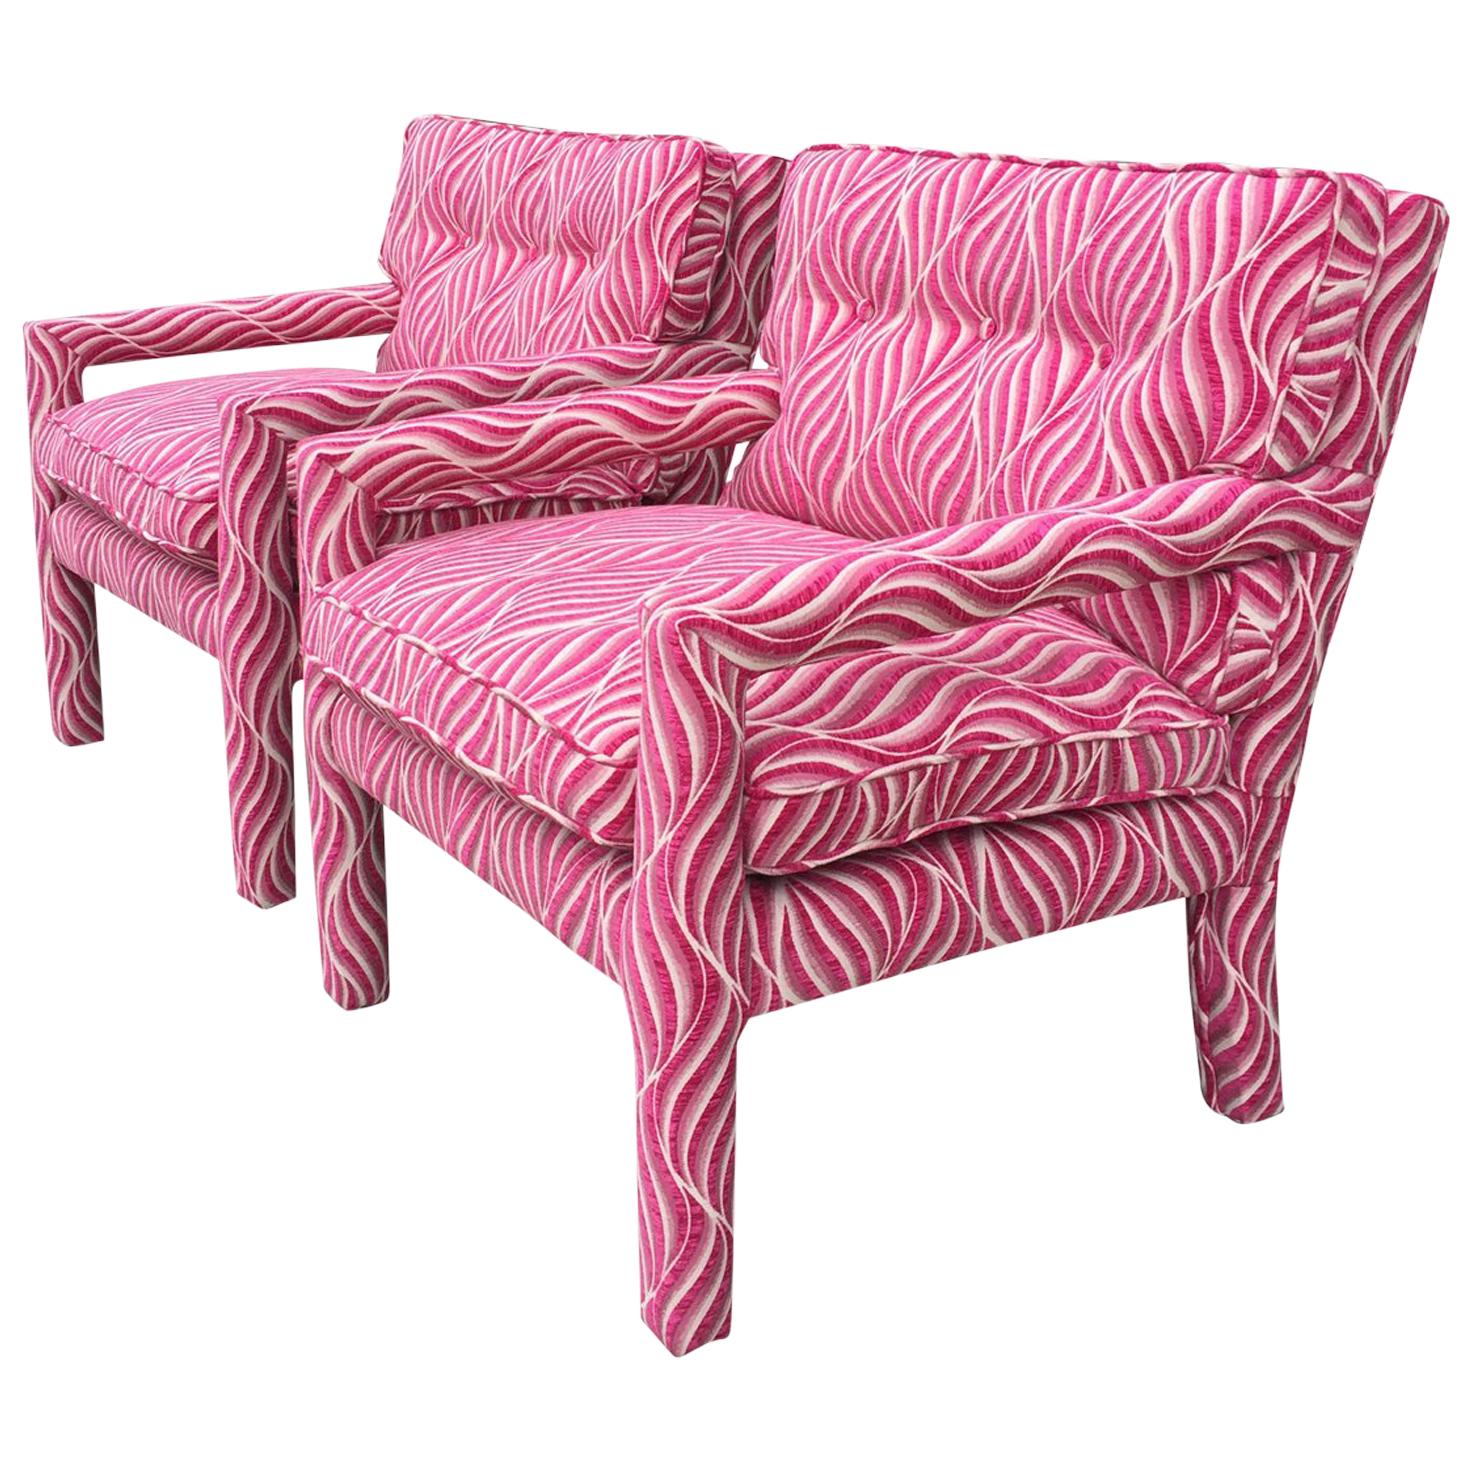 Fuschia Pink and White Animal Print Parsons Chairs